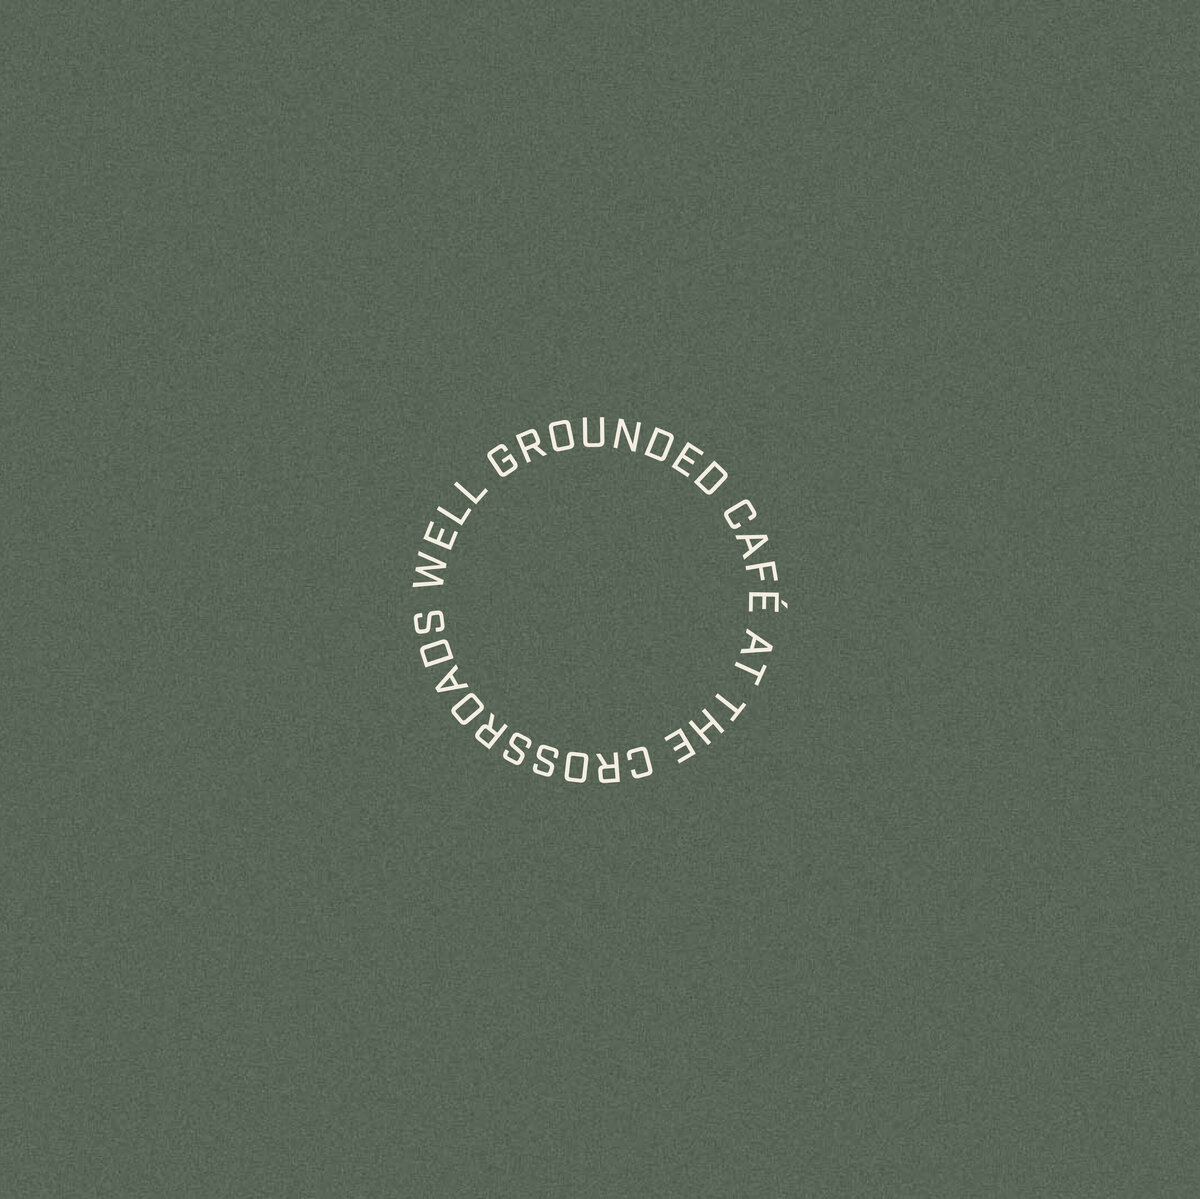 Well_Grounded_Brand_Identity_Concept_6